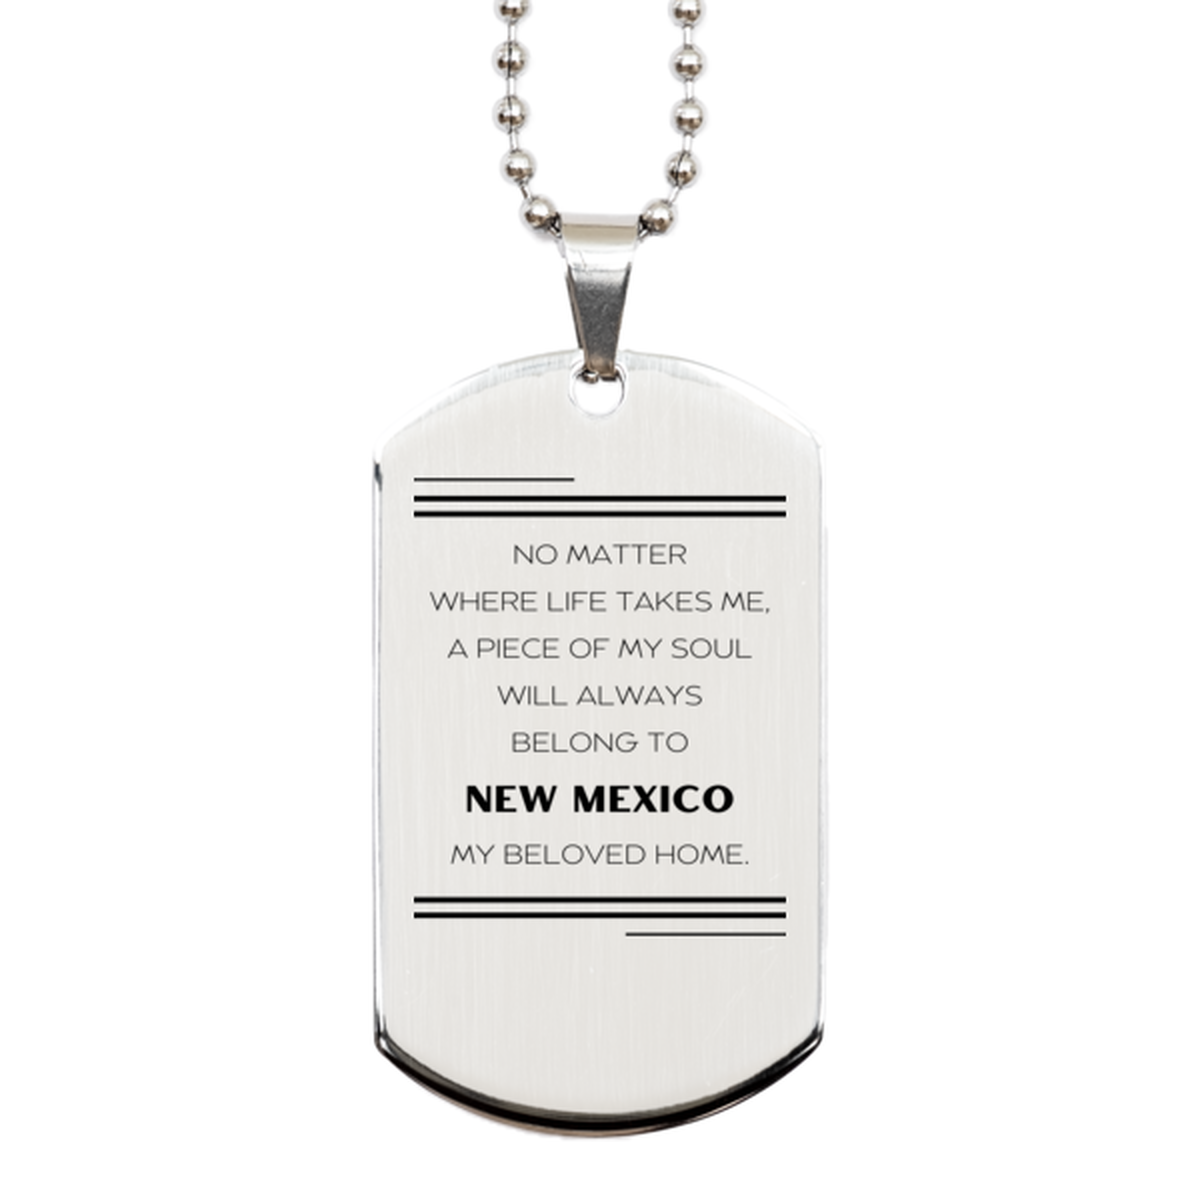 Love New Mexico State Gifts, My soul will always belong to New Mexico, Proud Silver Dog Tag, Birthday Unique Gifts For New Mexico Men, Women, Friends